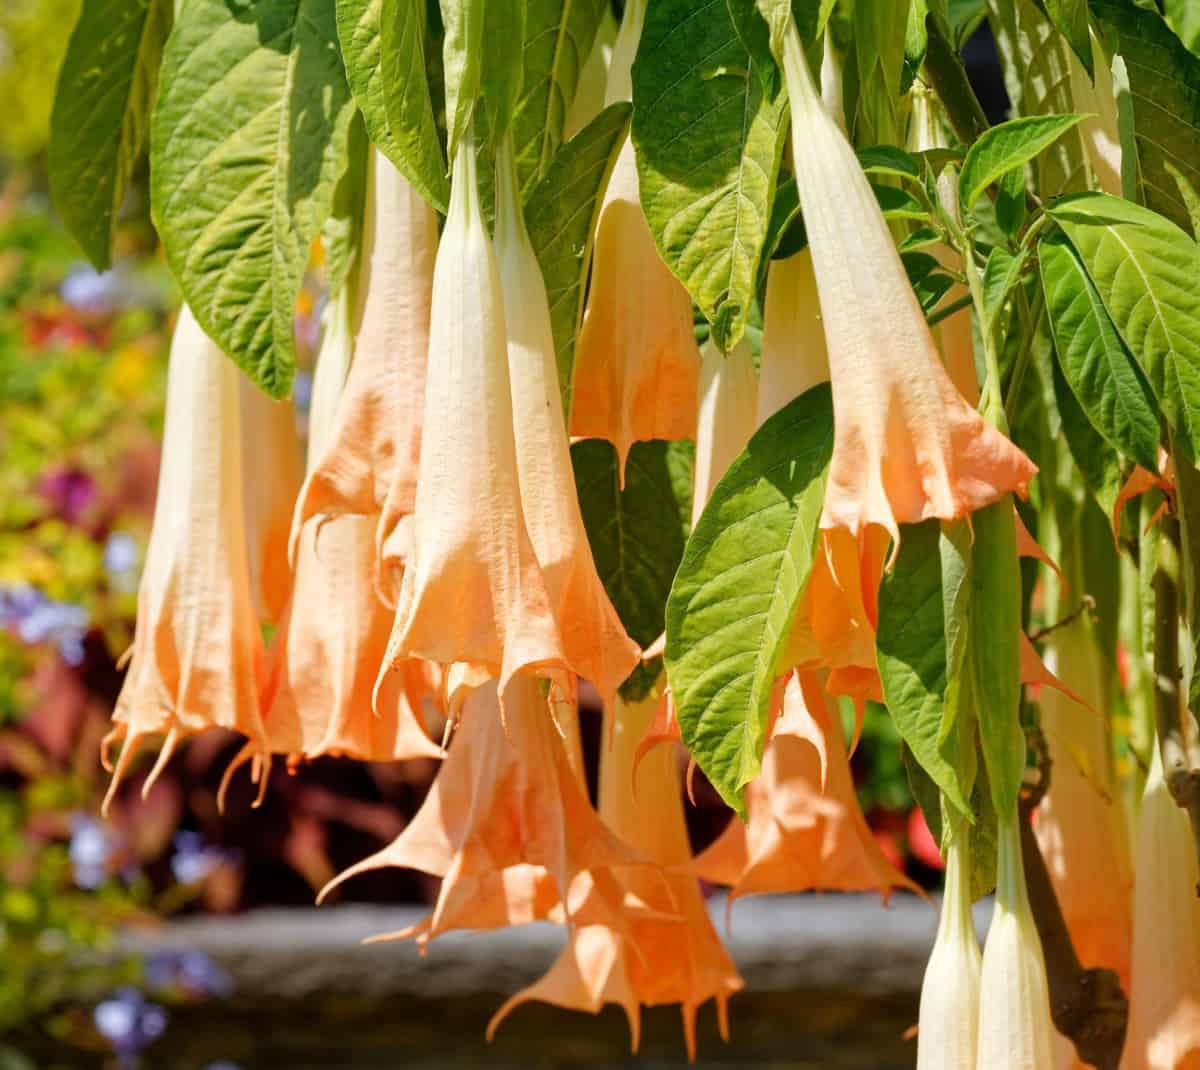 The angel's trumpet is a woody shrub that attracts hummingbirds.